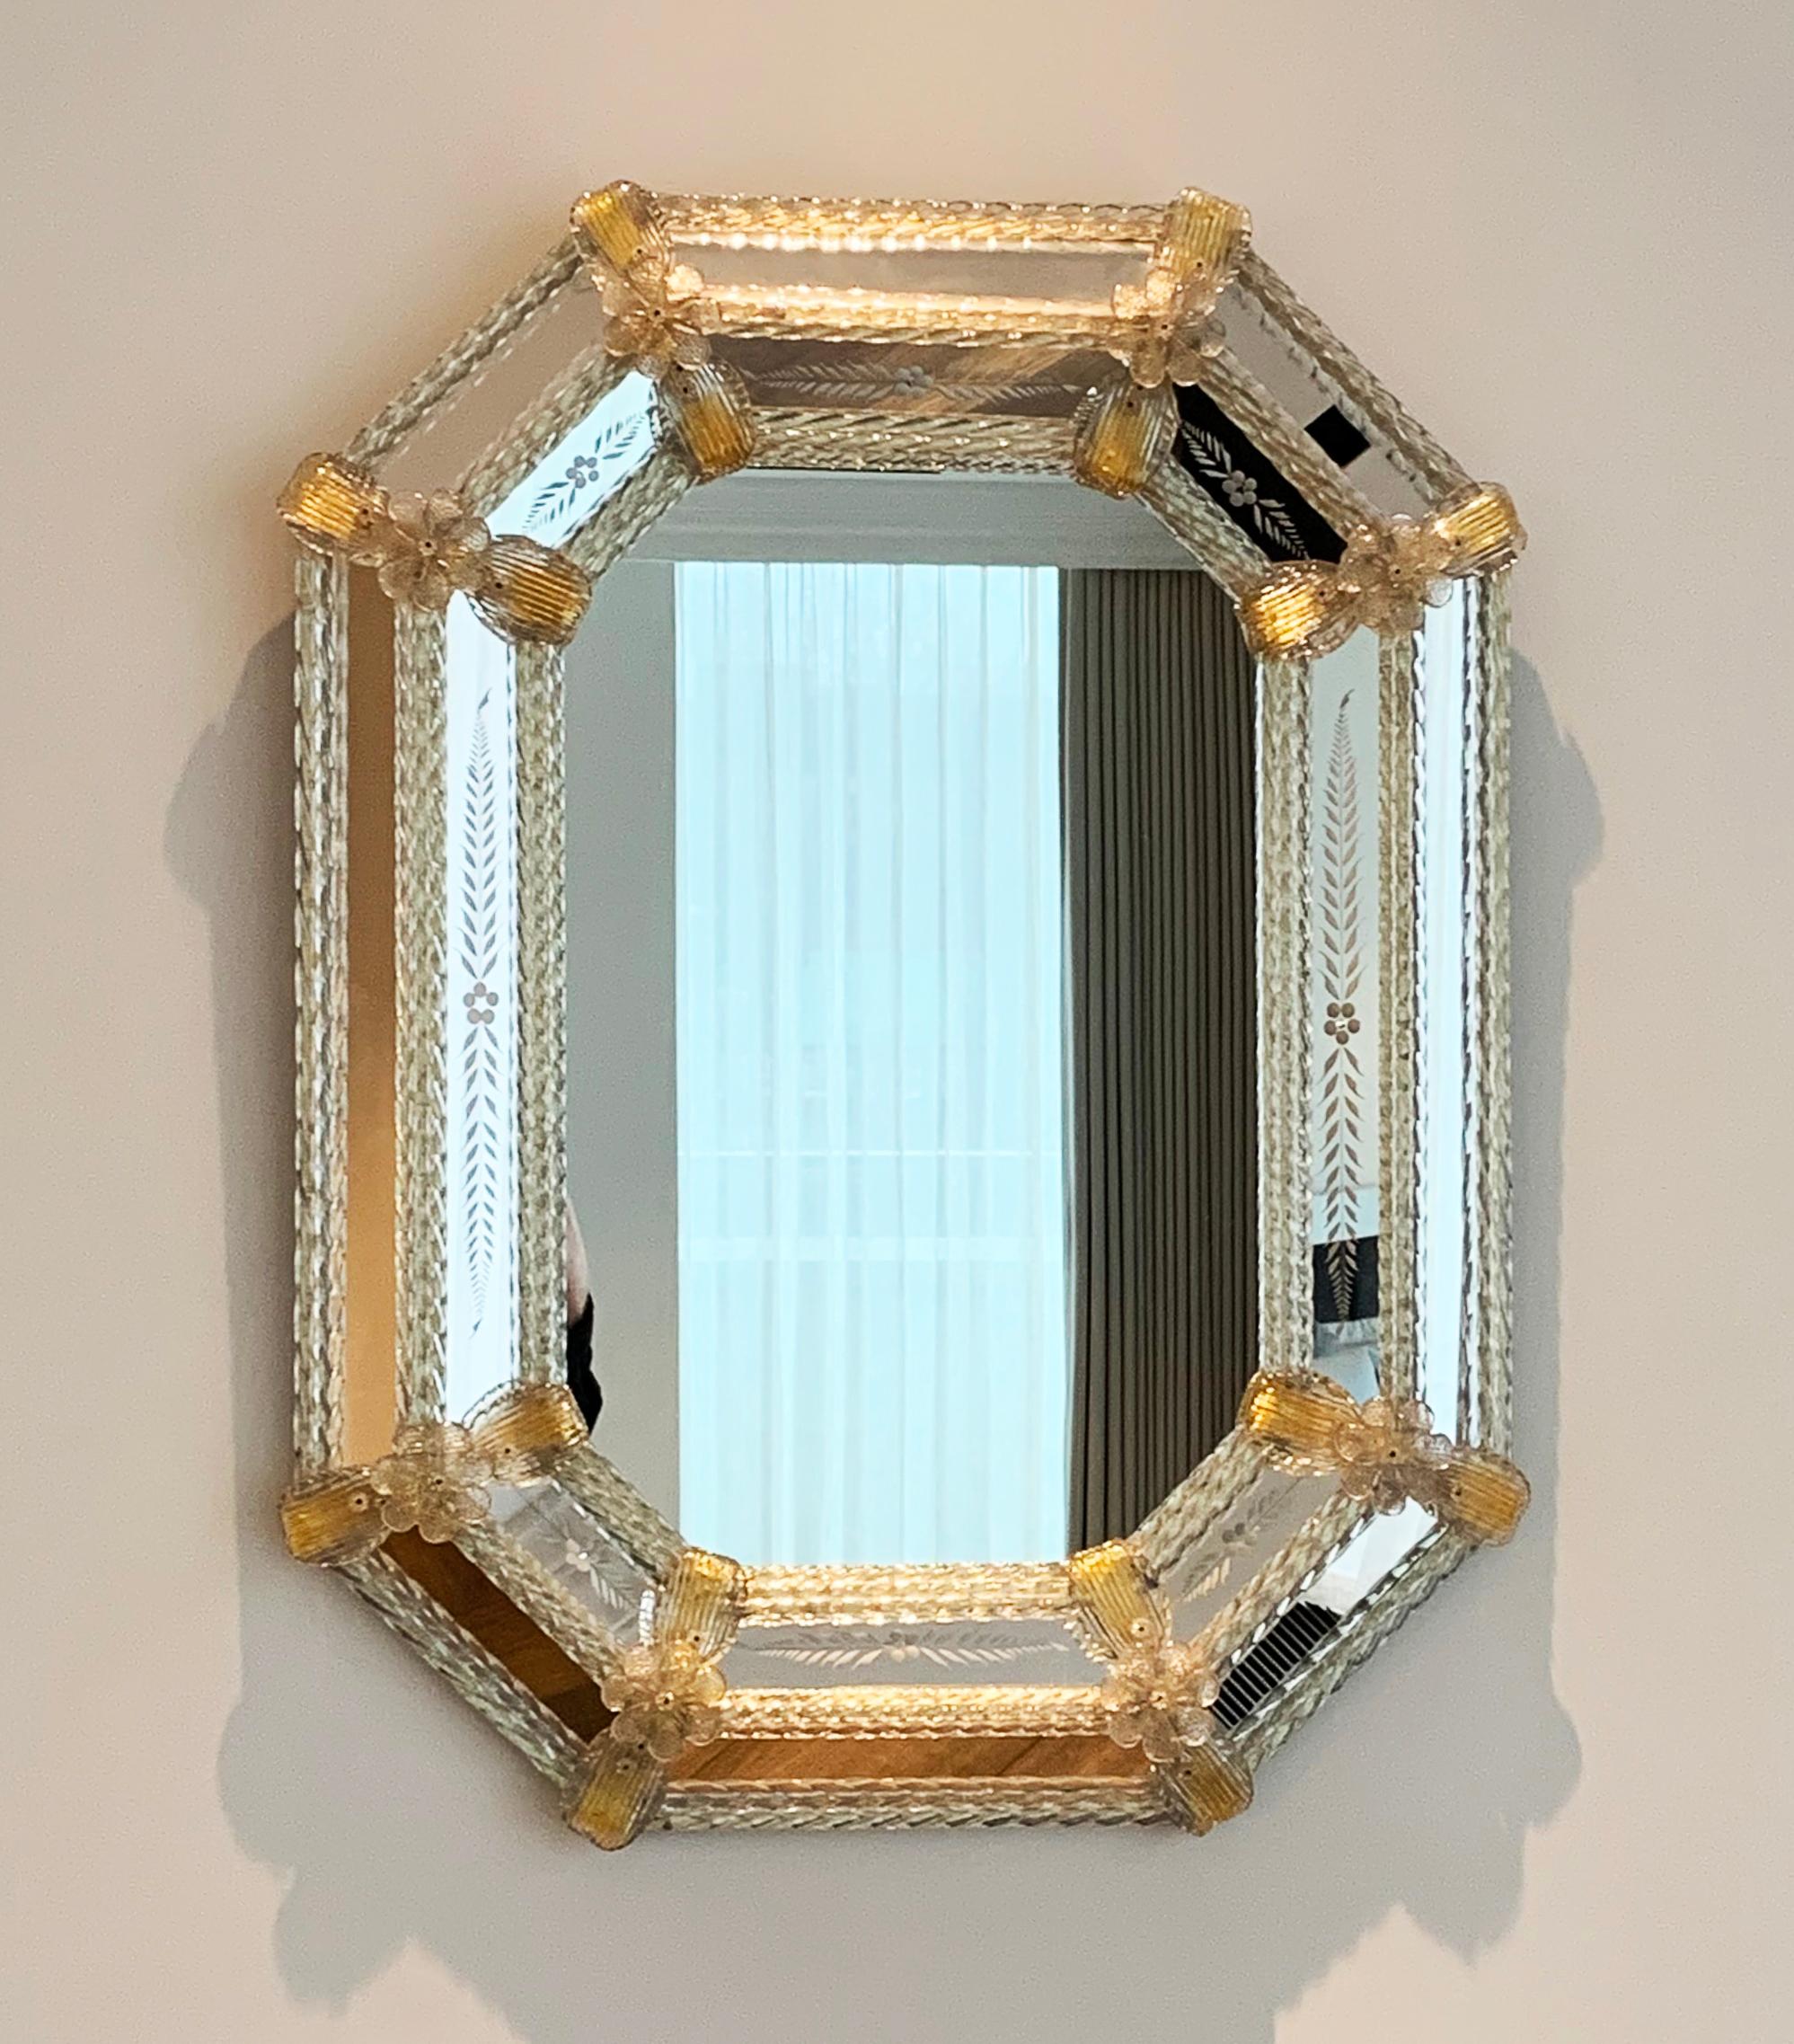 Octagonal Venetian Mirror Gold Leaf Murano Glass 

A true work of art. This octagonal mirror is adorned with the finest hand crafted Murano glass, a piece that exemplifies the skill and craftsmanship from the world renowned makers of Murano.

Taking